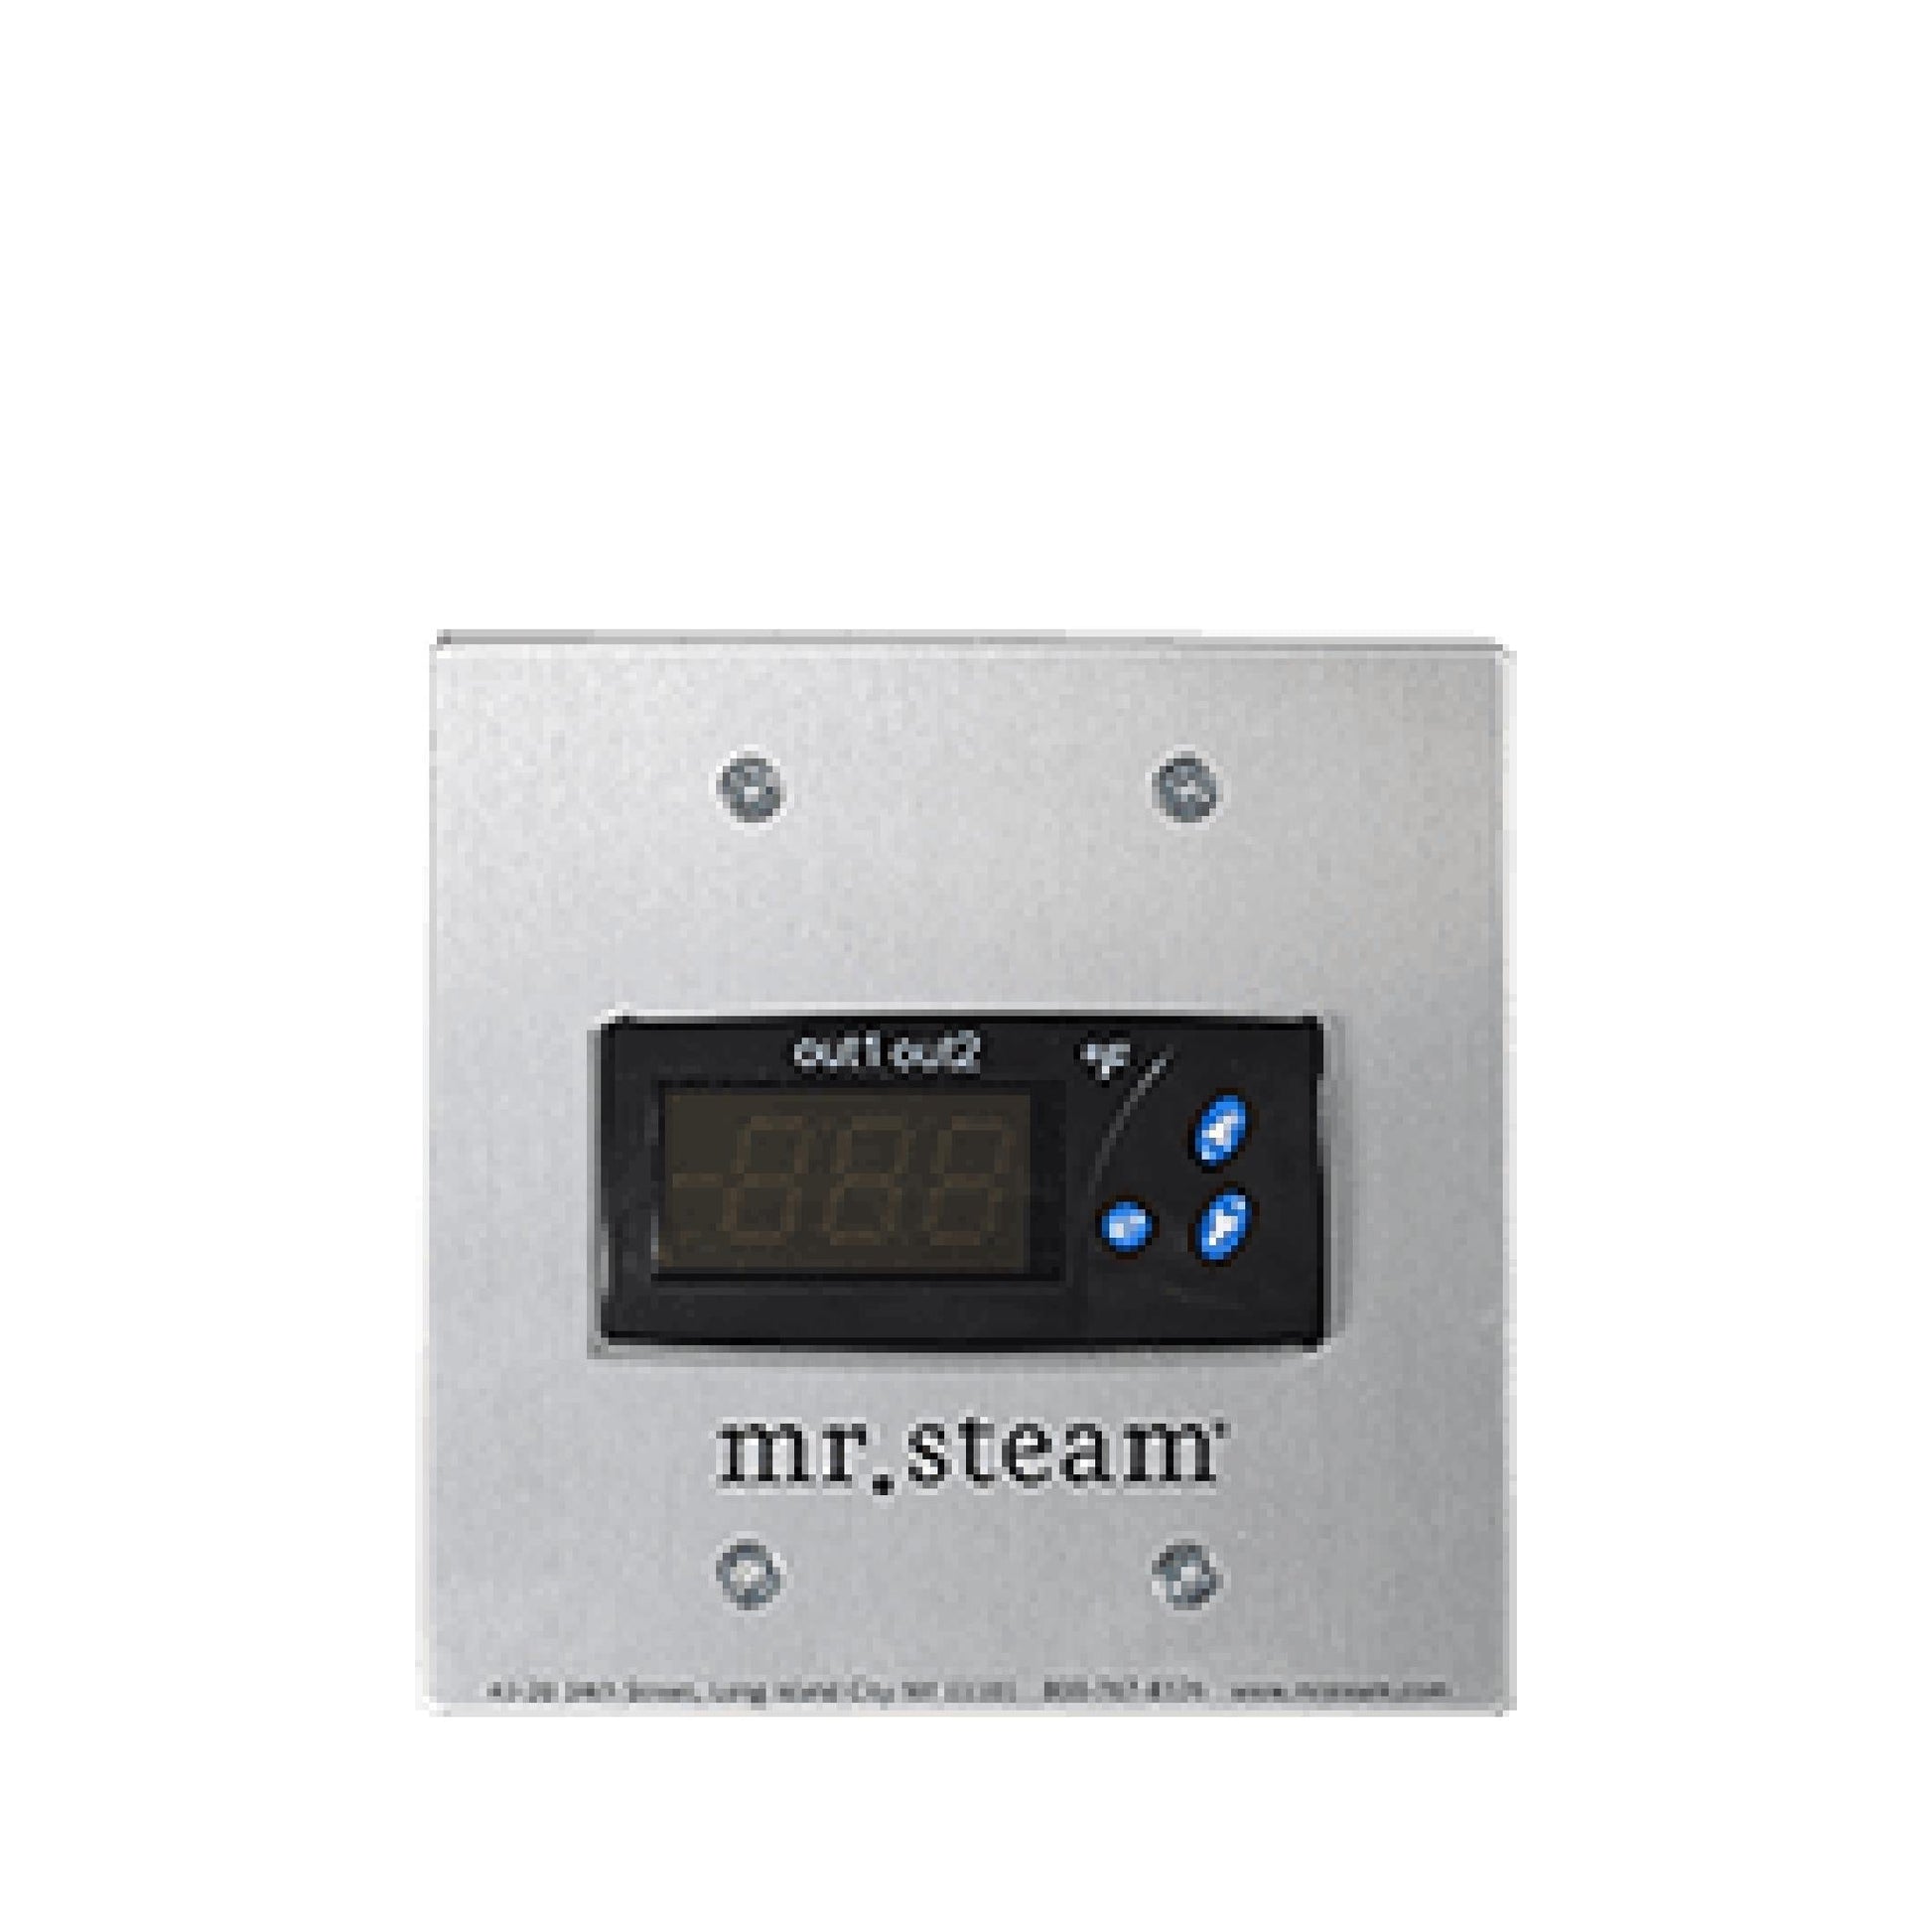 MrSteam Commercial CU 1 Generator 30 kW 240 V 3 PH Package with Digital 1 Control Steamhead & Blowdown System